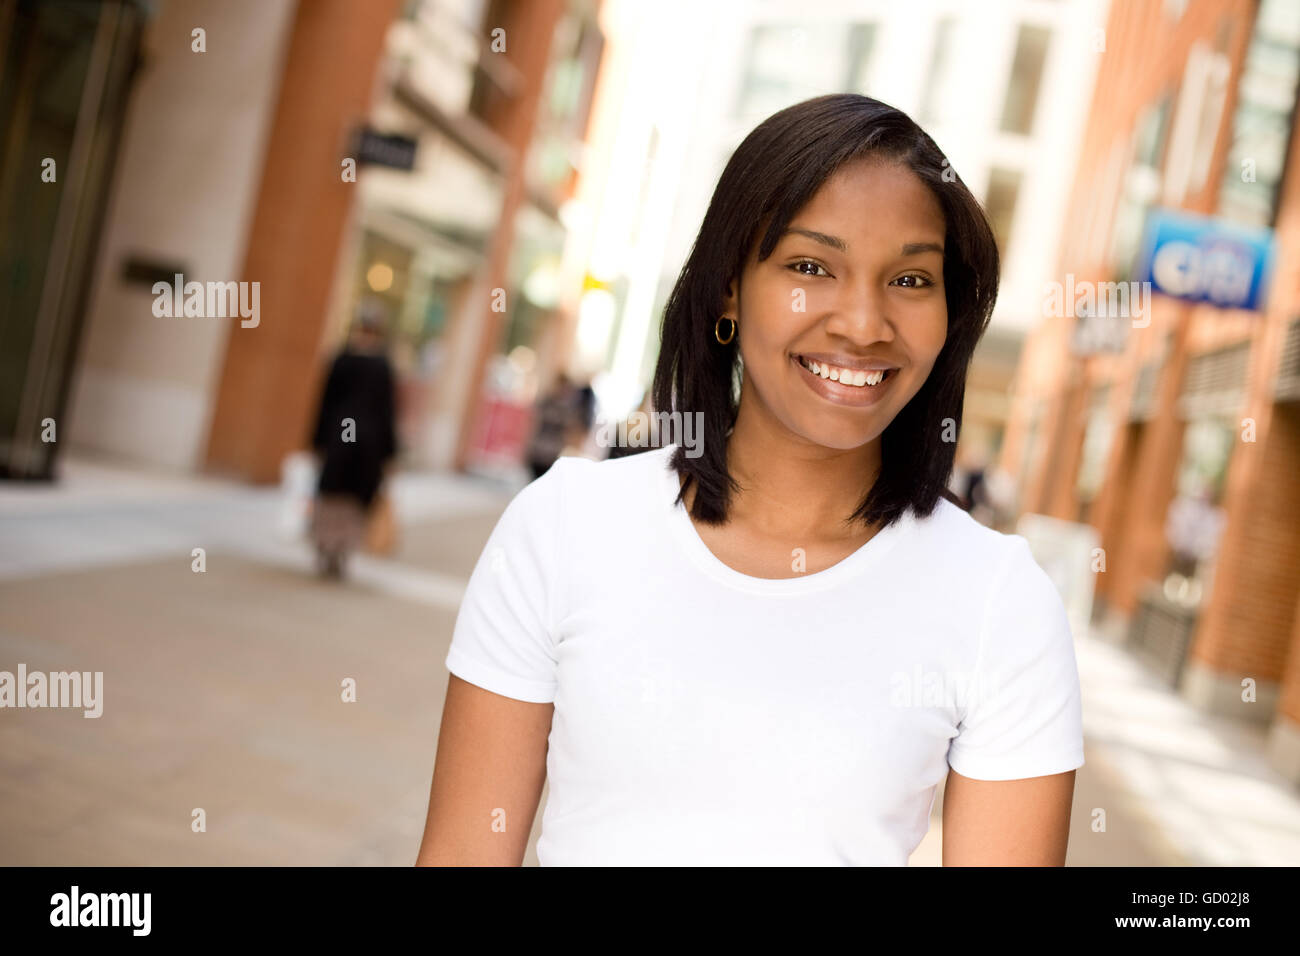 portrait of a happy young woman Stock Photo